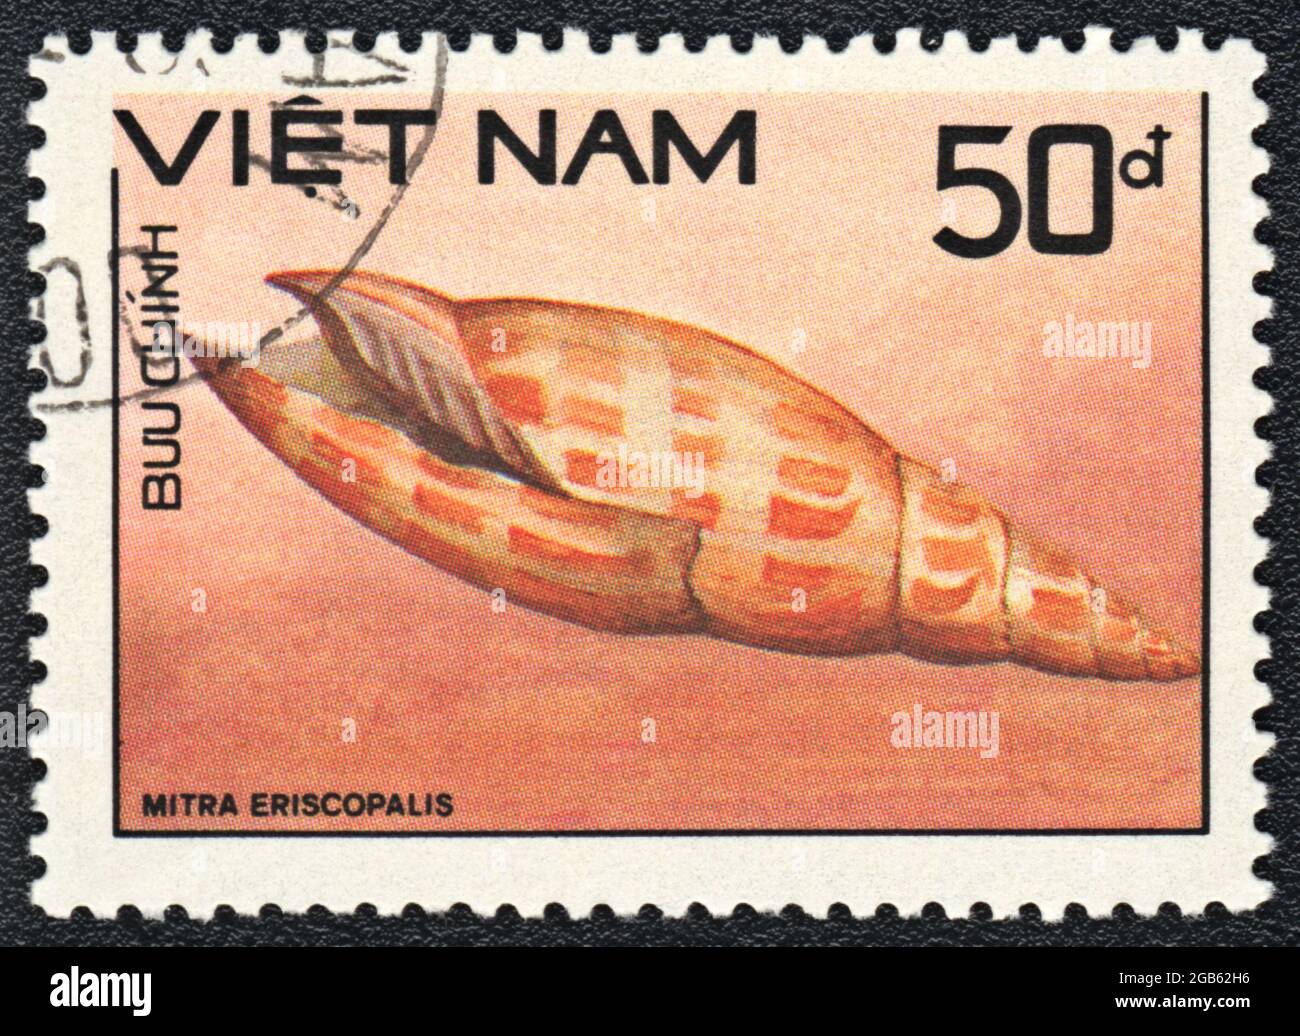 Postage stamp printed in Vietnam  shows a Mitra episcopalis,  series 'Shell', circa 1989 Stock Photo